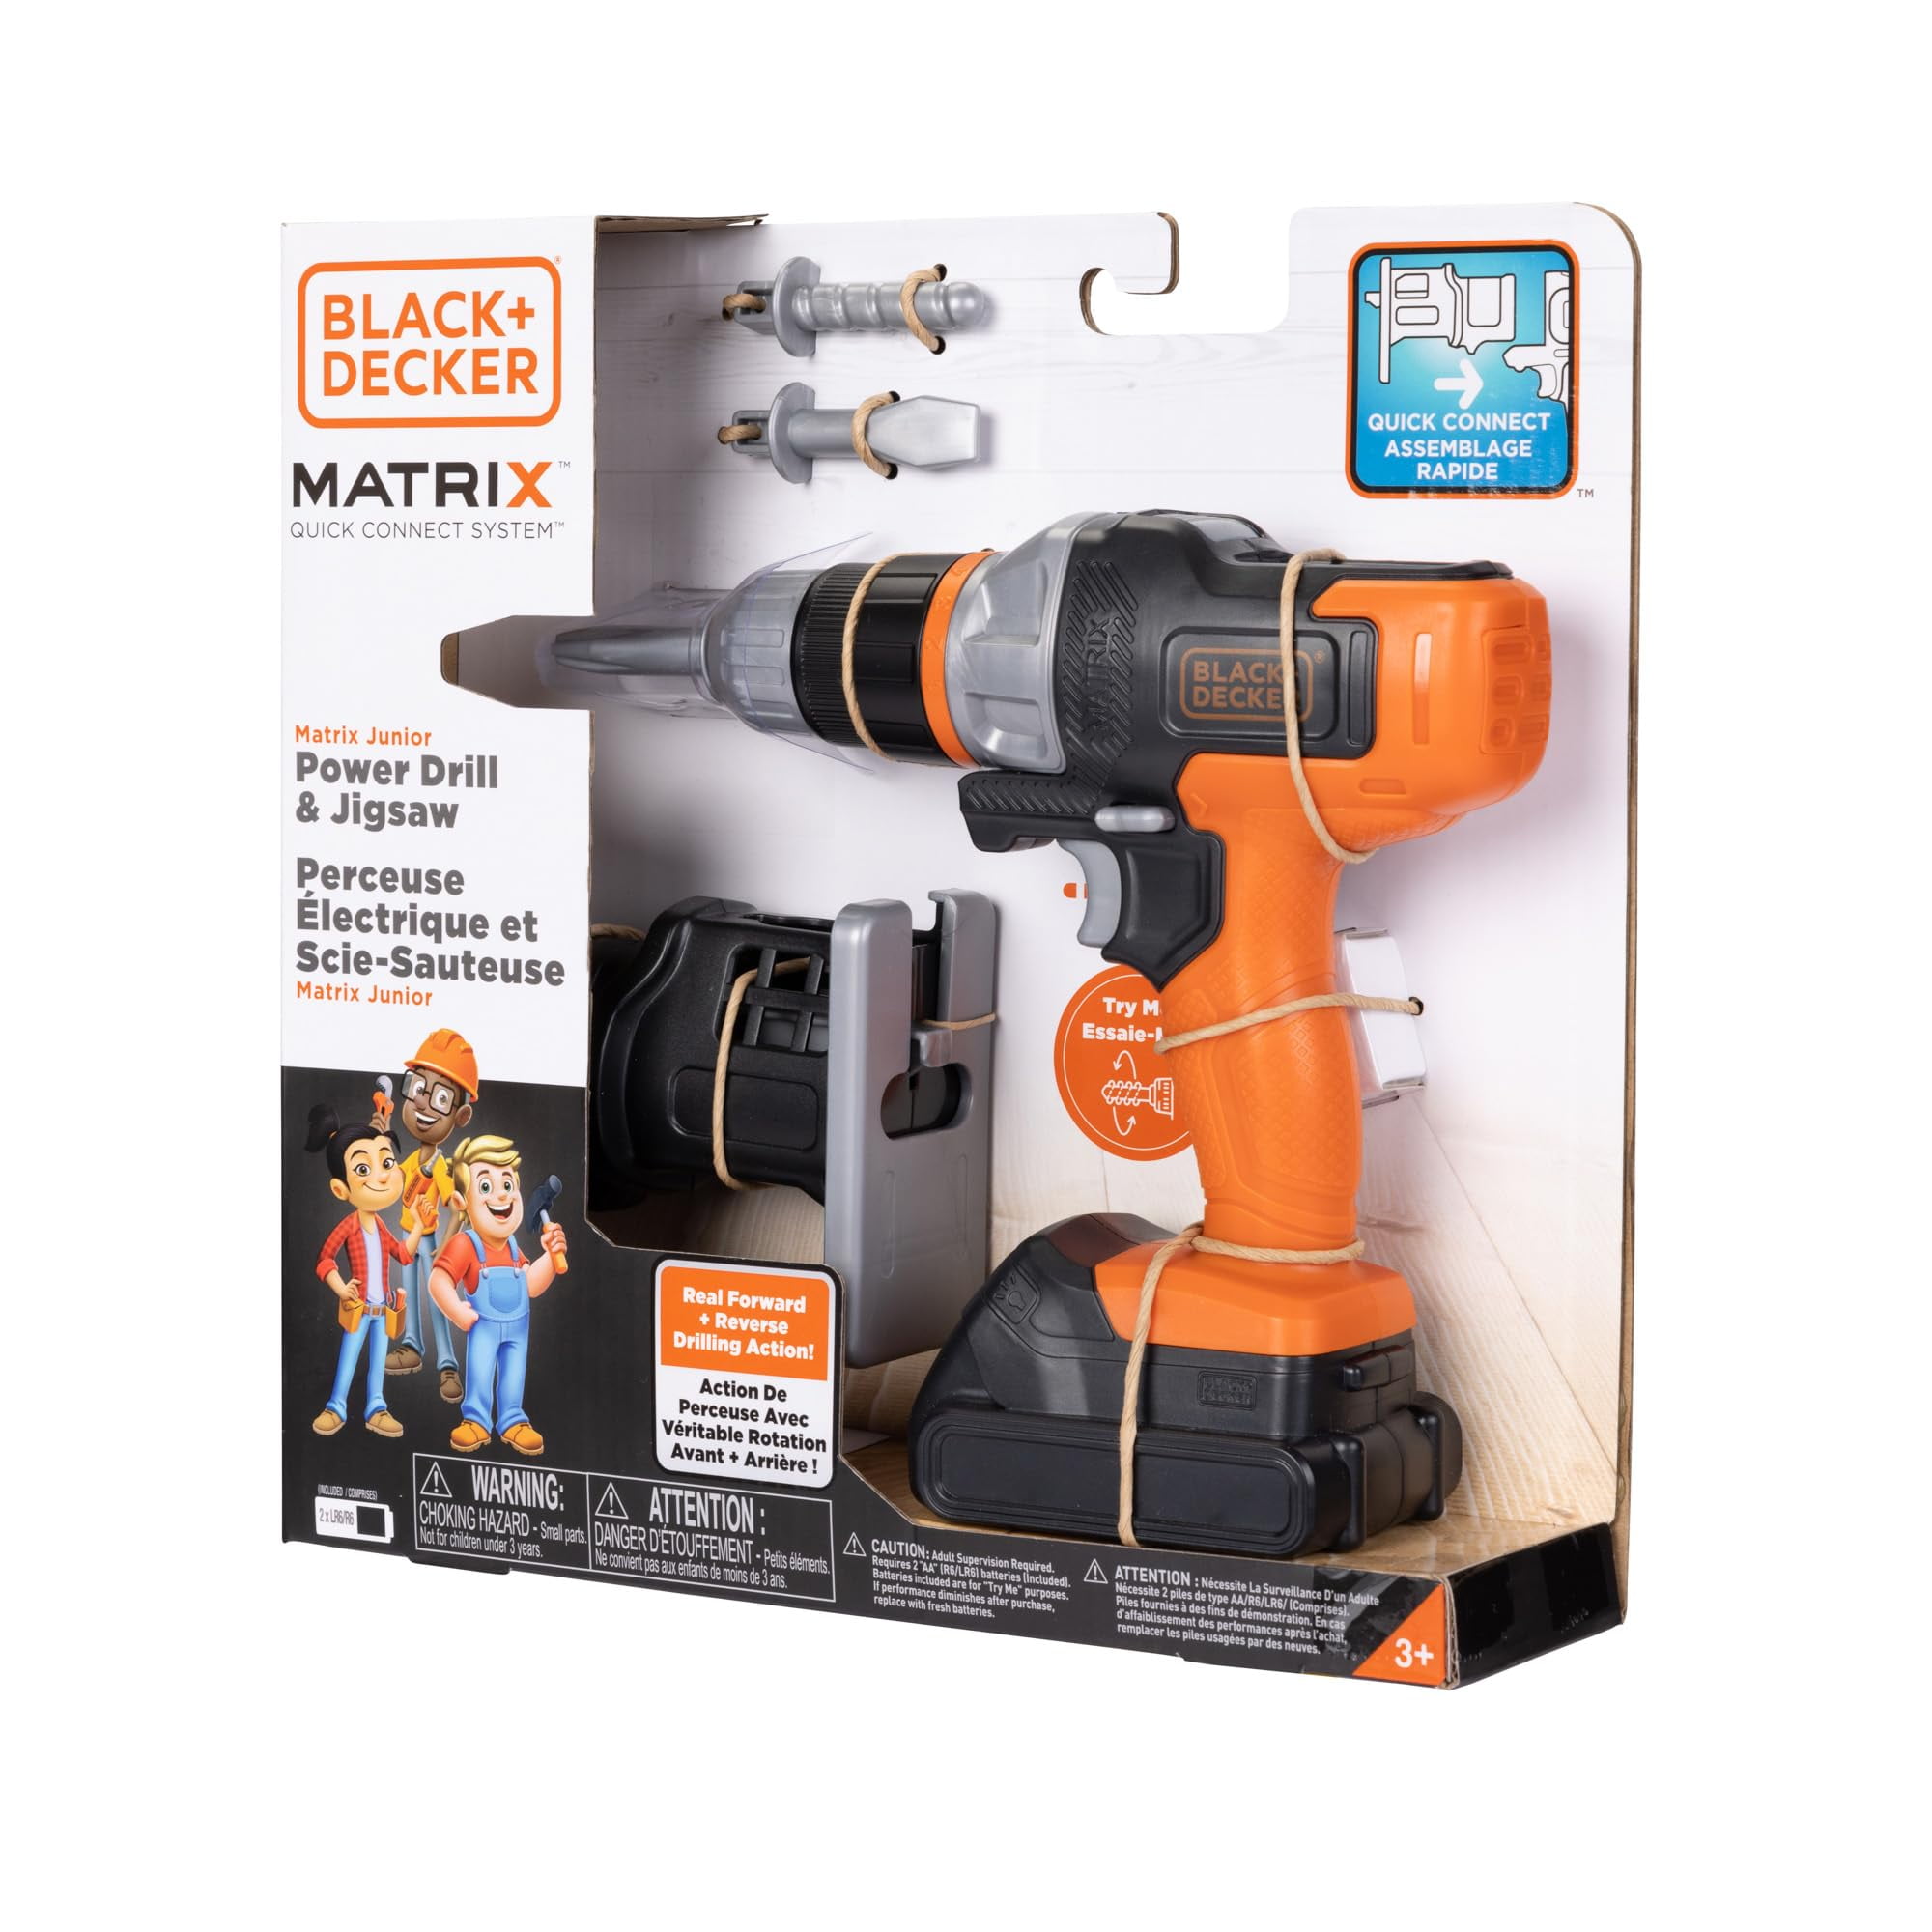 Black+decker Kids Tools All-in-One Mega Case with Matrix Drill, Jigsaw and Sander 25 Pieces Play Tools for Kids